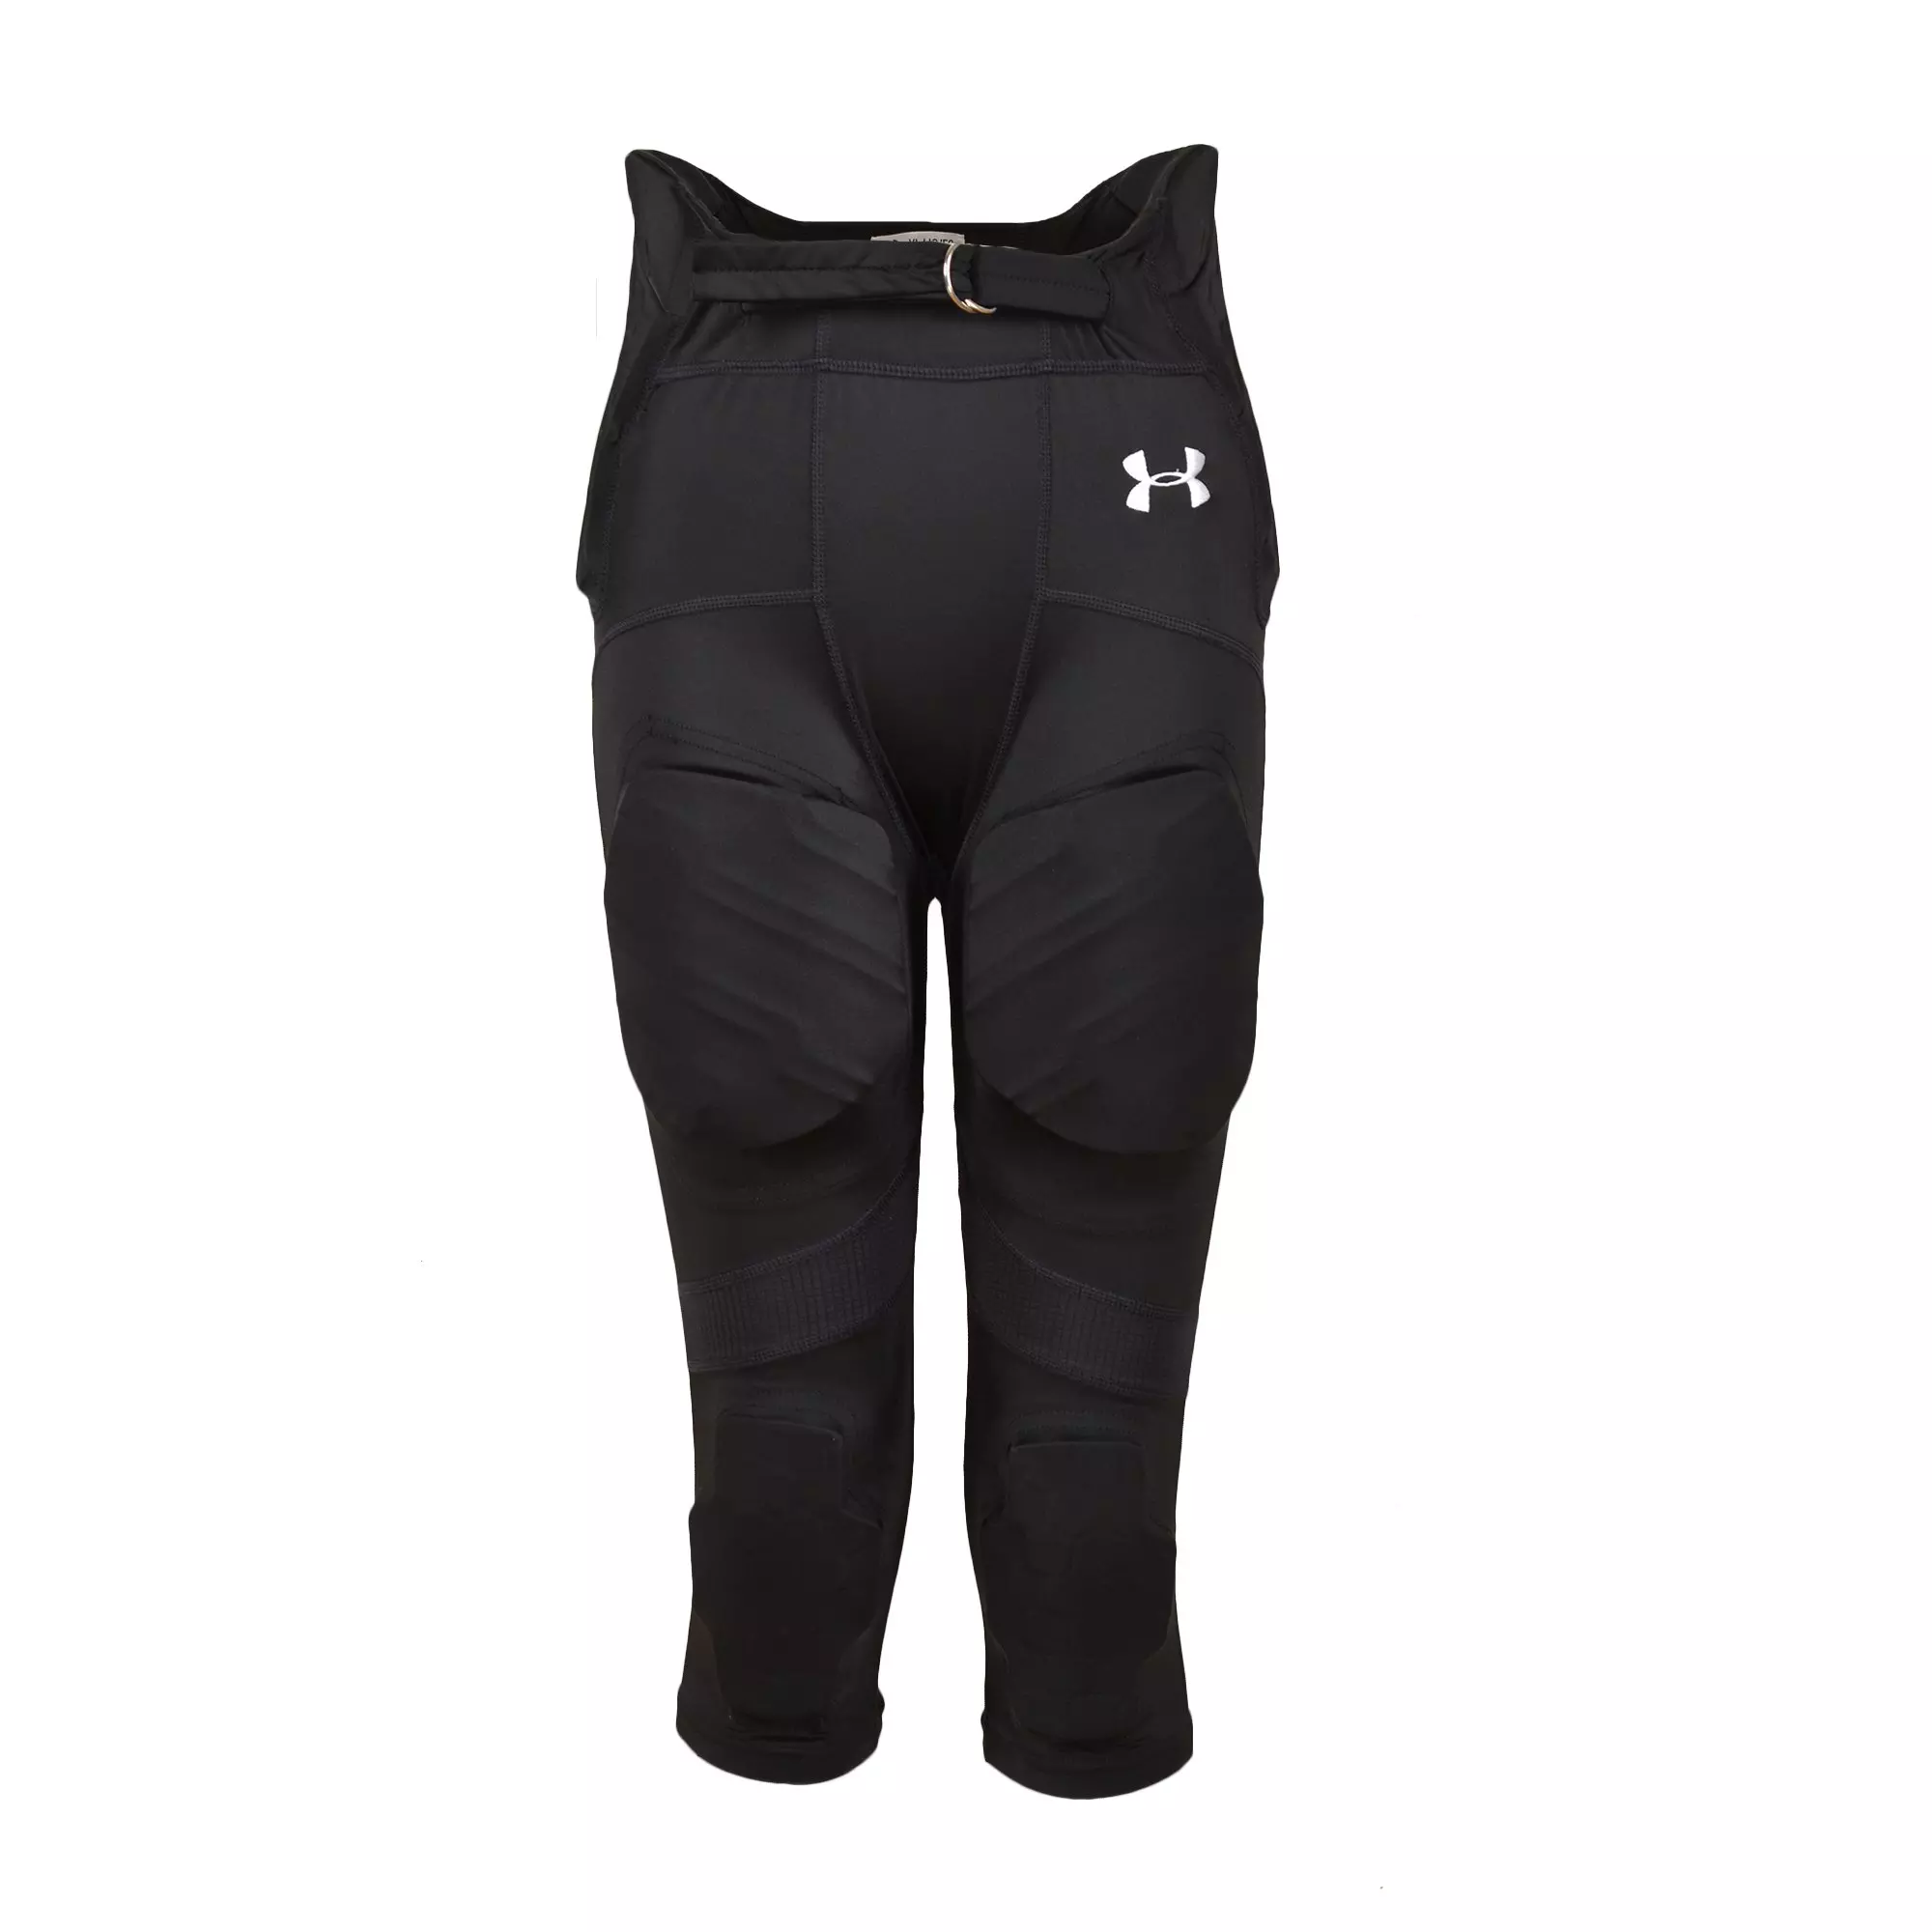 Thermoactive pants   - Football boots & equipment